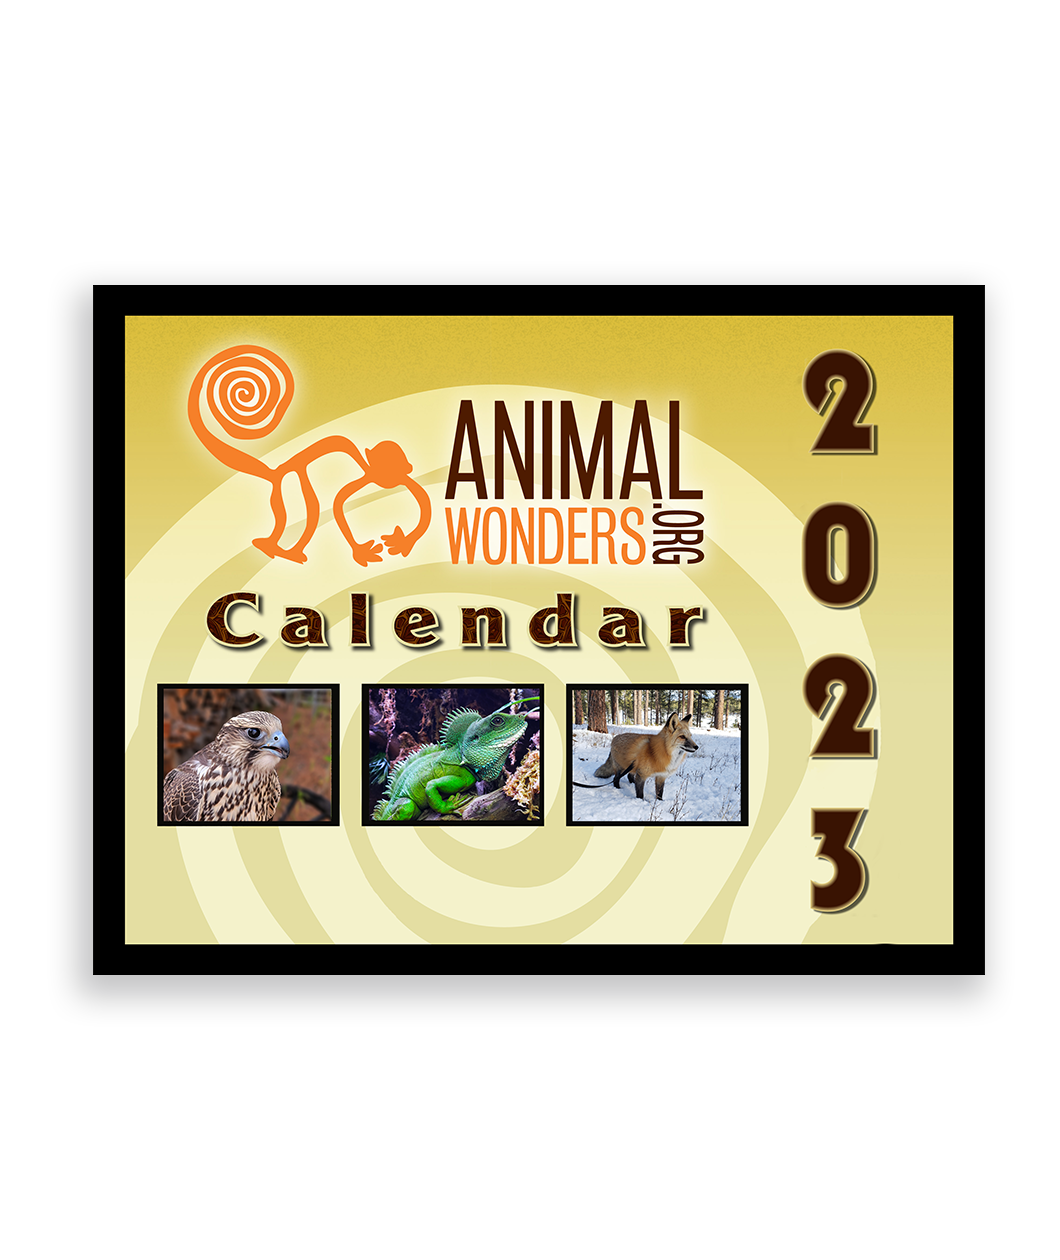 The cover of the Animal Wonders 2023 Calendar is a light yellow color with a swirl in the background. It features three small photos of a bird, iguana and fox under the Animal Wonders logo. "2023" is written down the right side of the cover in large text. 